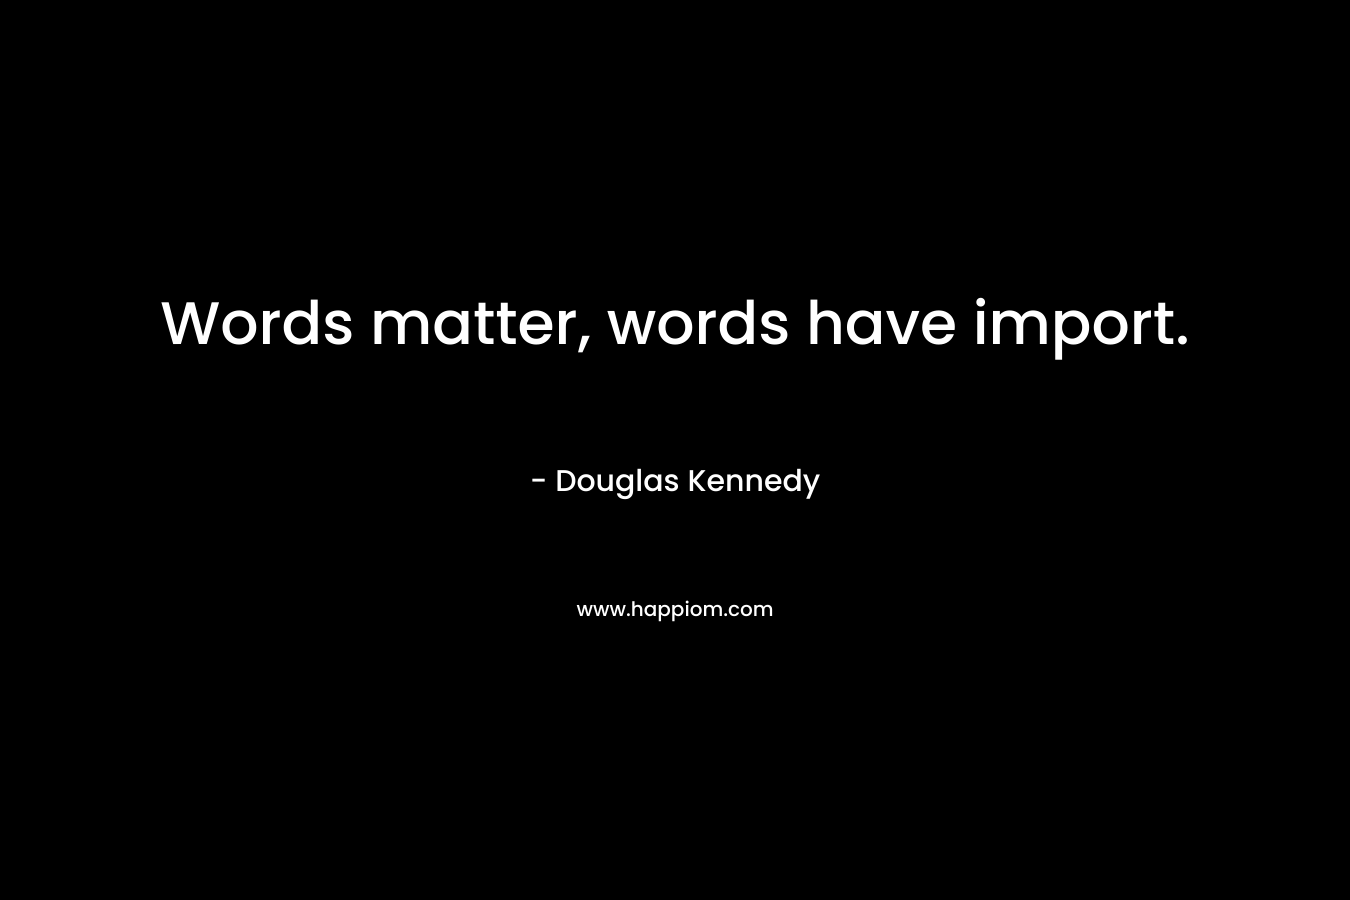 Words matter, words have import.